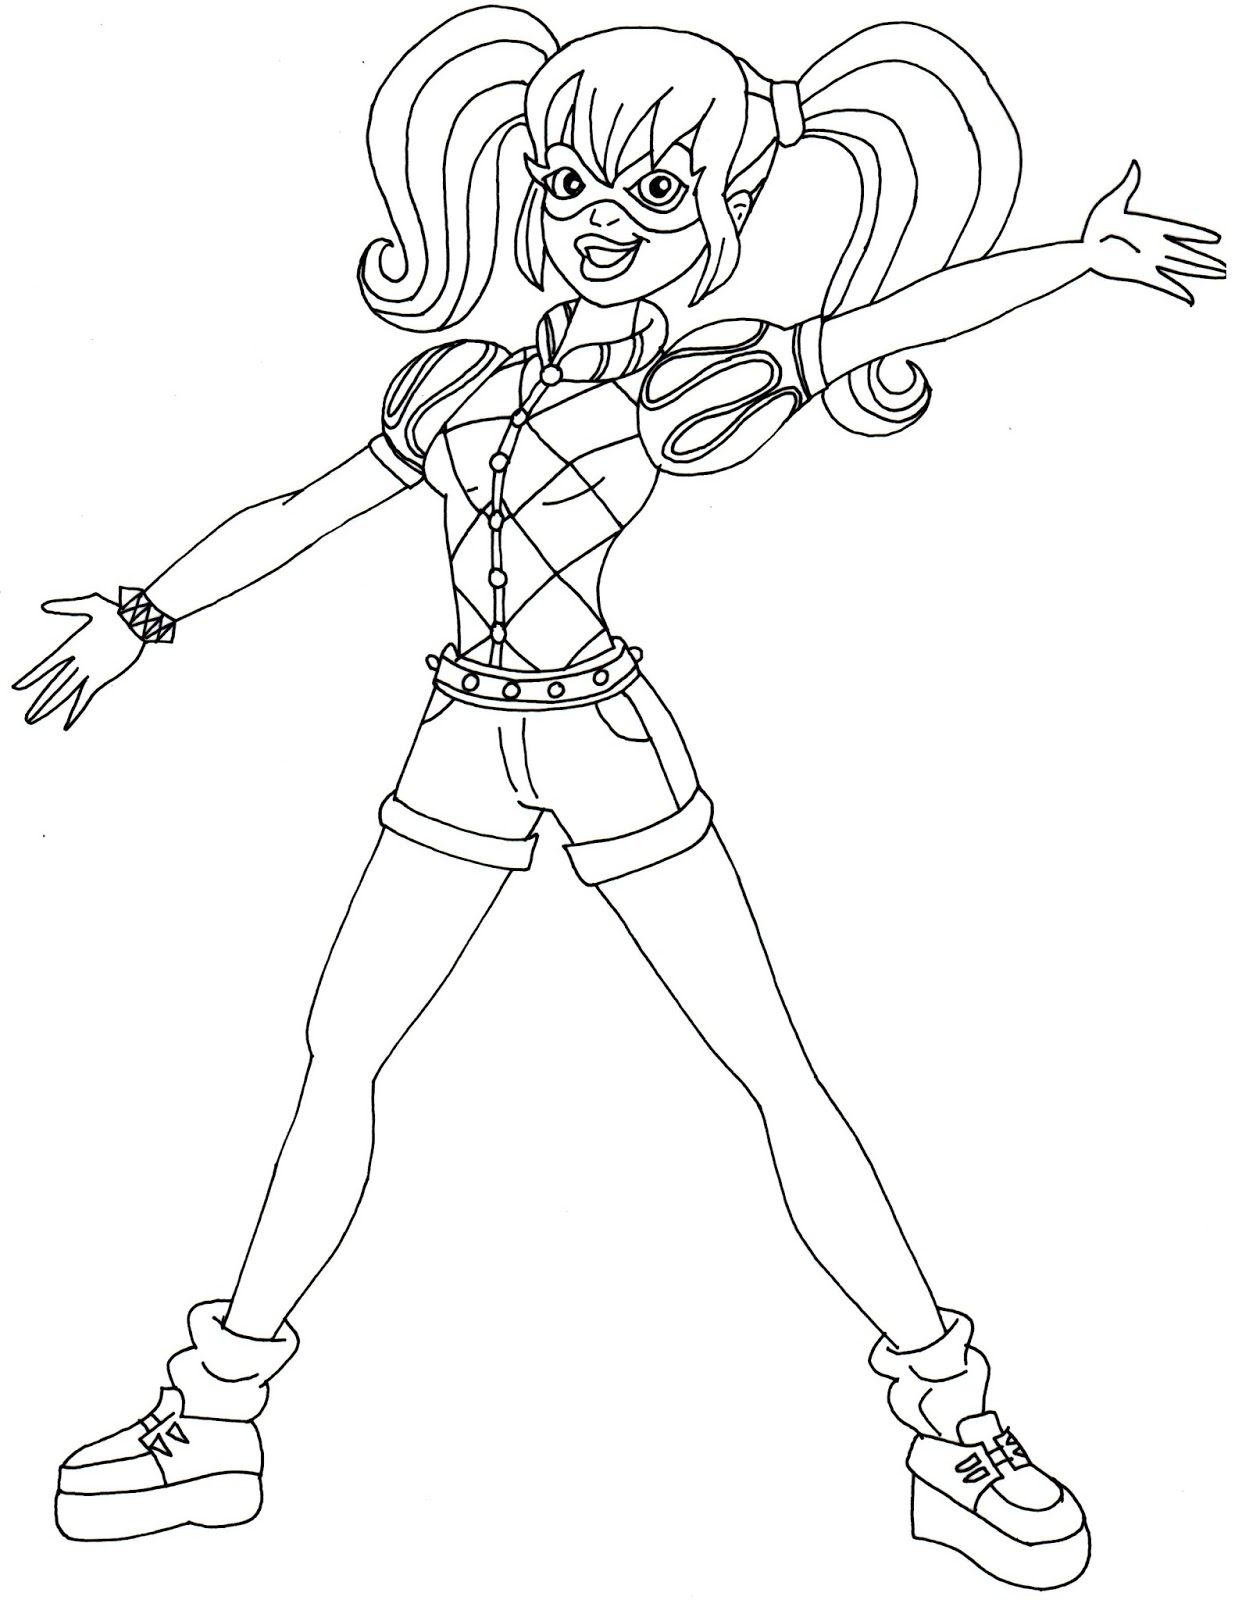 Harley Quinn Coloring Pages To Print Harley Quinn Coloring Pages Best Coloring Pages For Kids